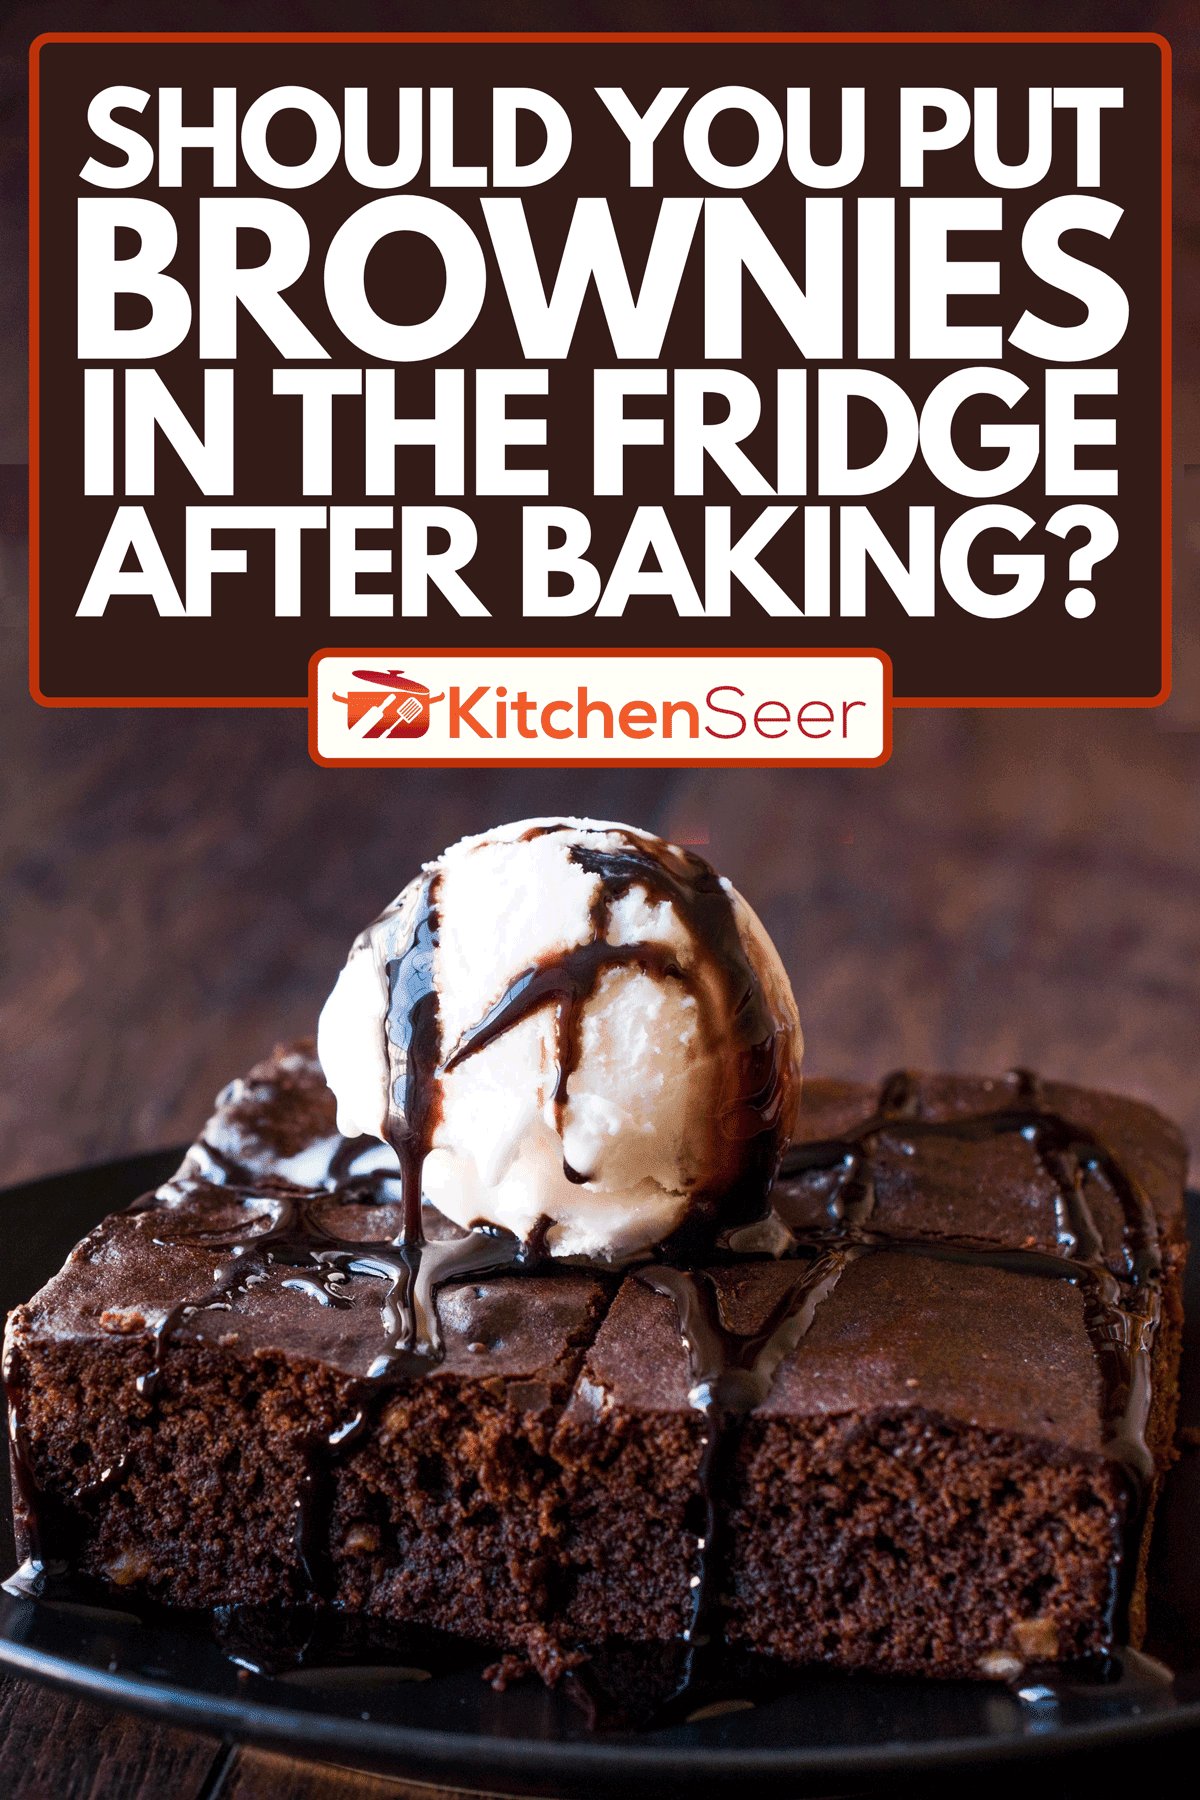 A chocolate brownie with ice cream and hazelnut powder, Should You Put Brownies In The Fridge After Baking?